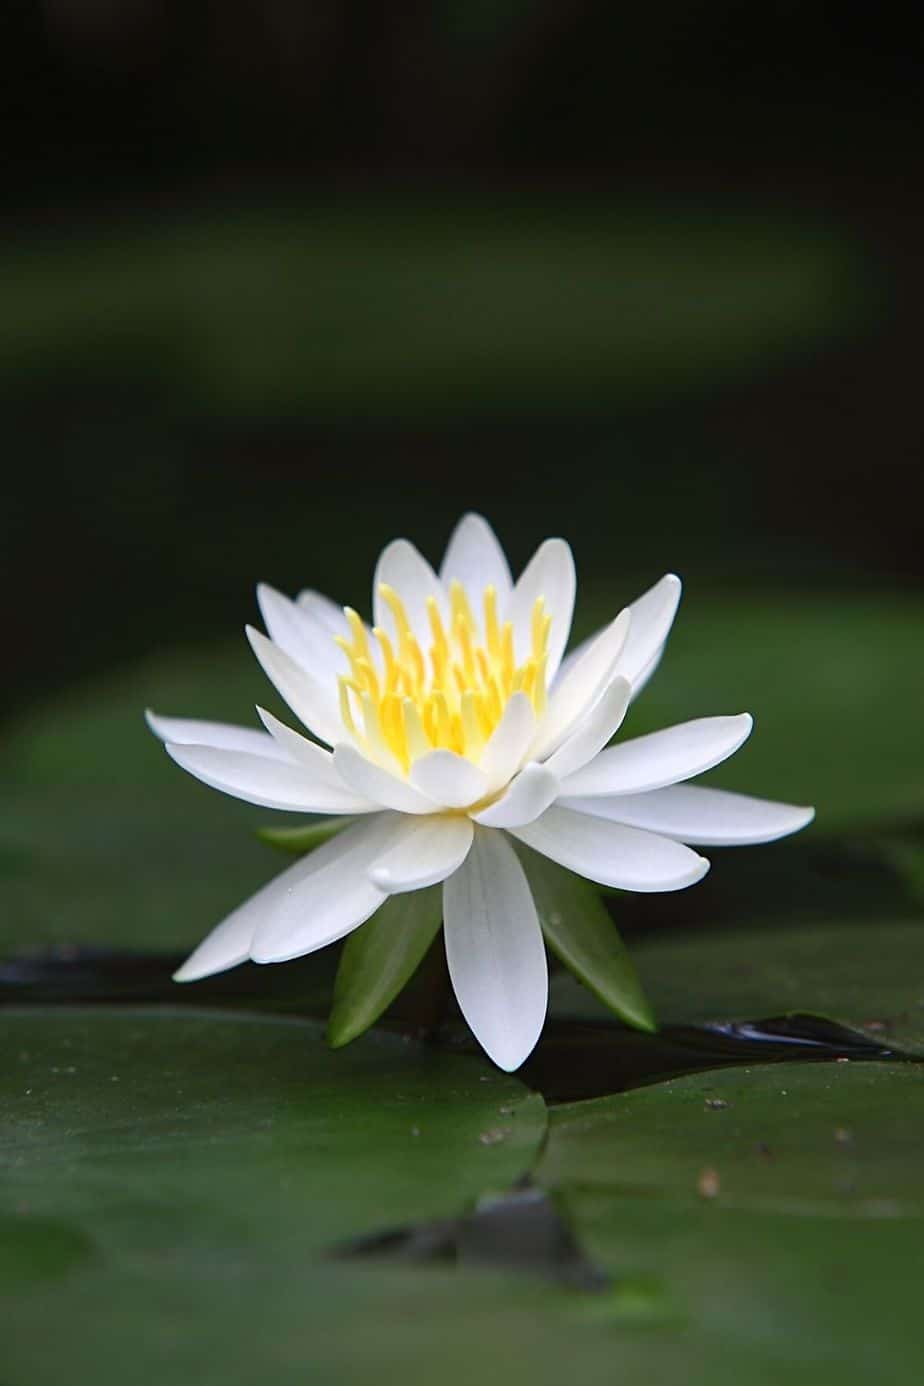 Lotus thrives in shallow and murky waters